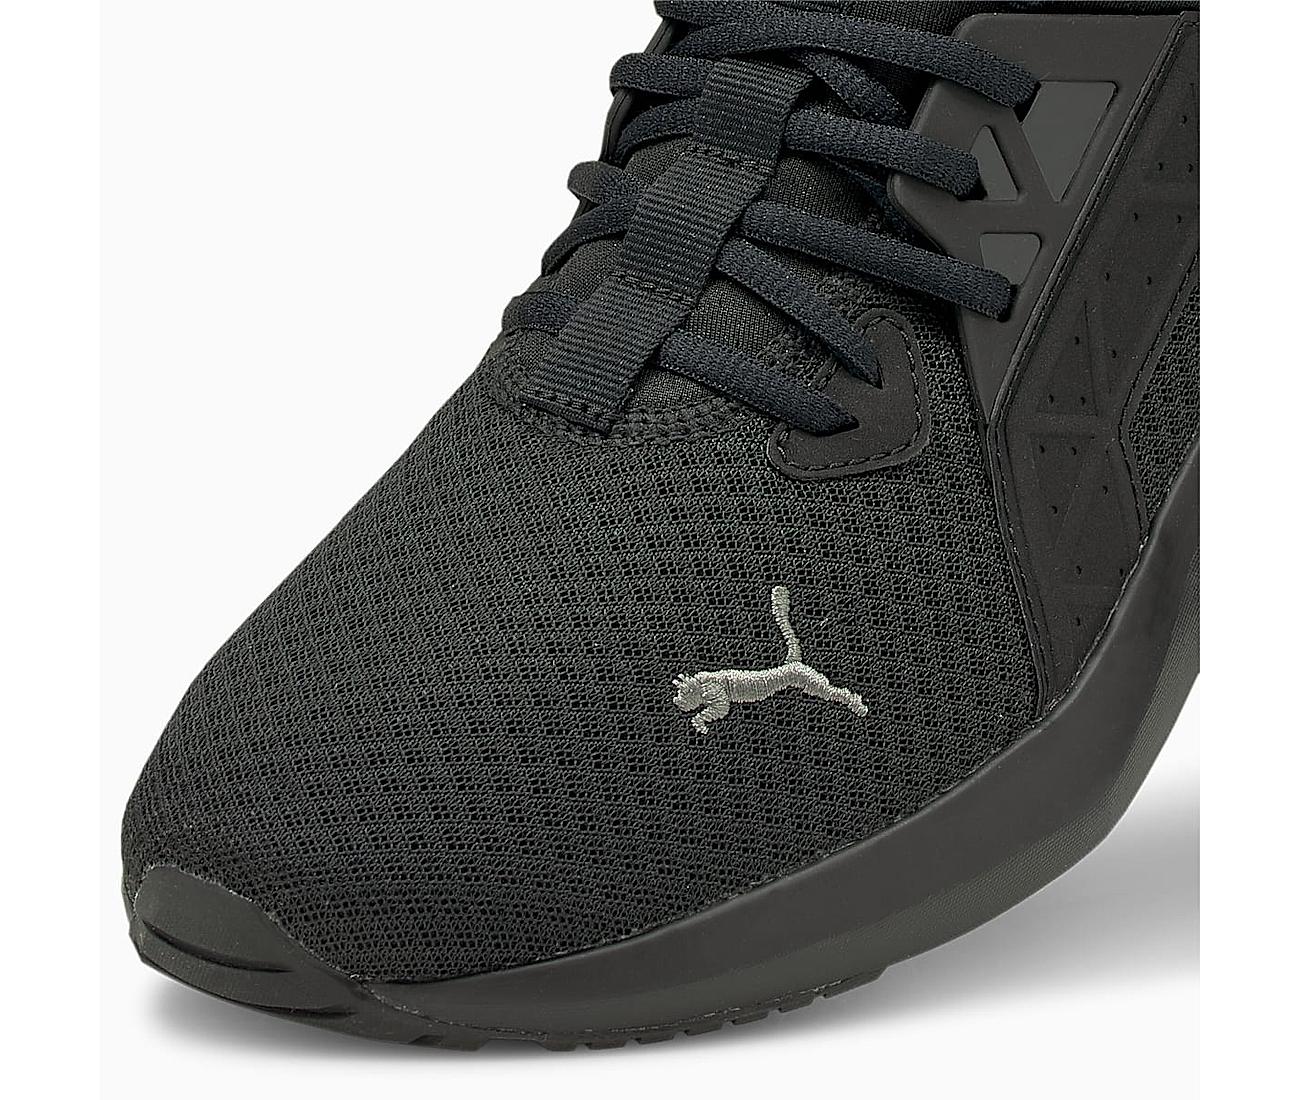 Puma Men Softride Enzo Nxt Sneakers Online at Regal Shoes 8389120